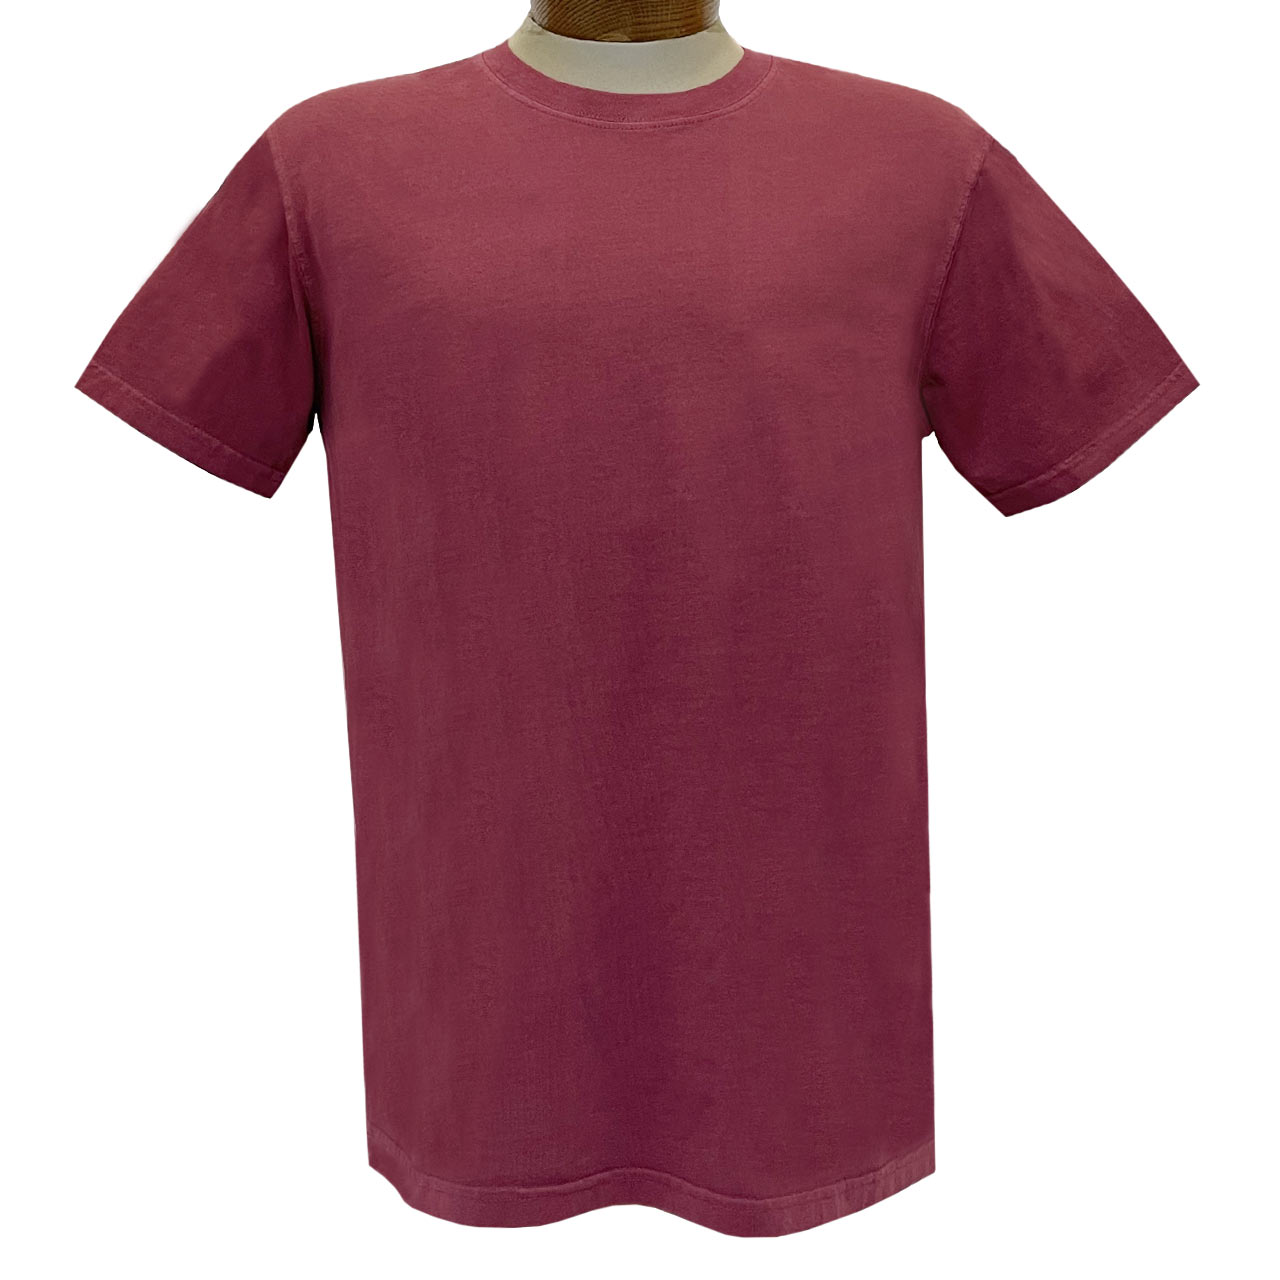 Men's R. Options by Basic Options Short Sleeve Pigment Dyed Tee, New Brick